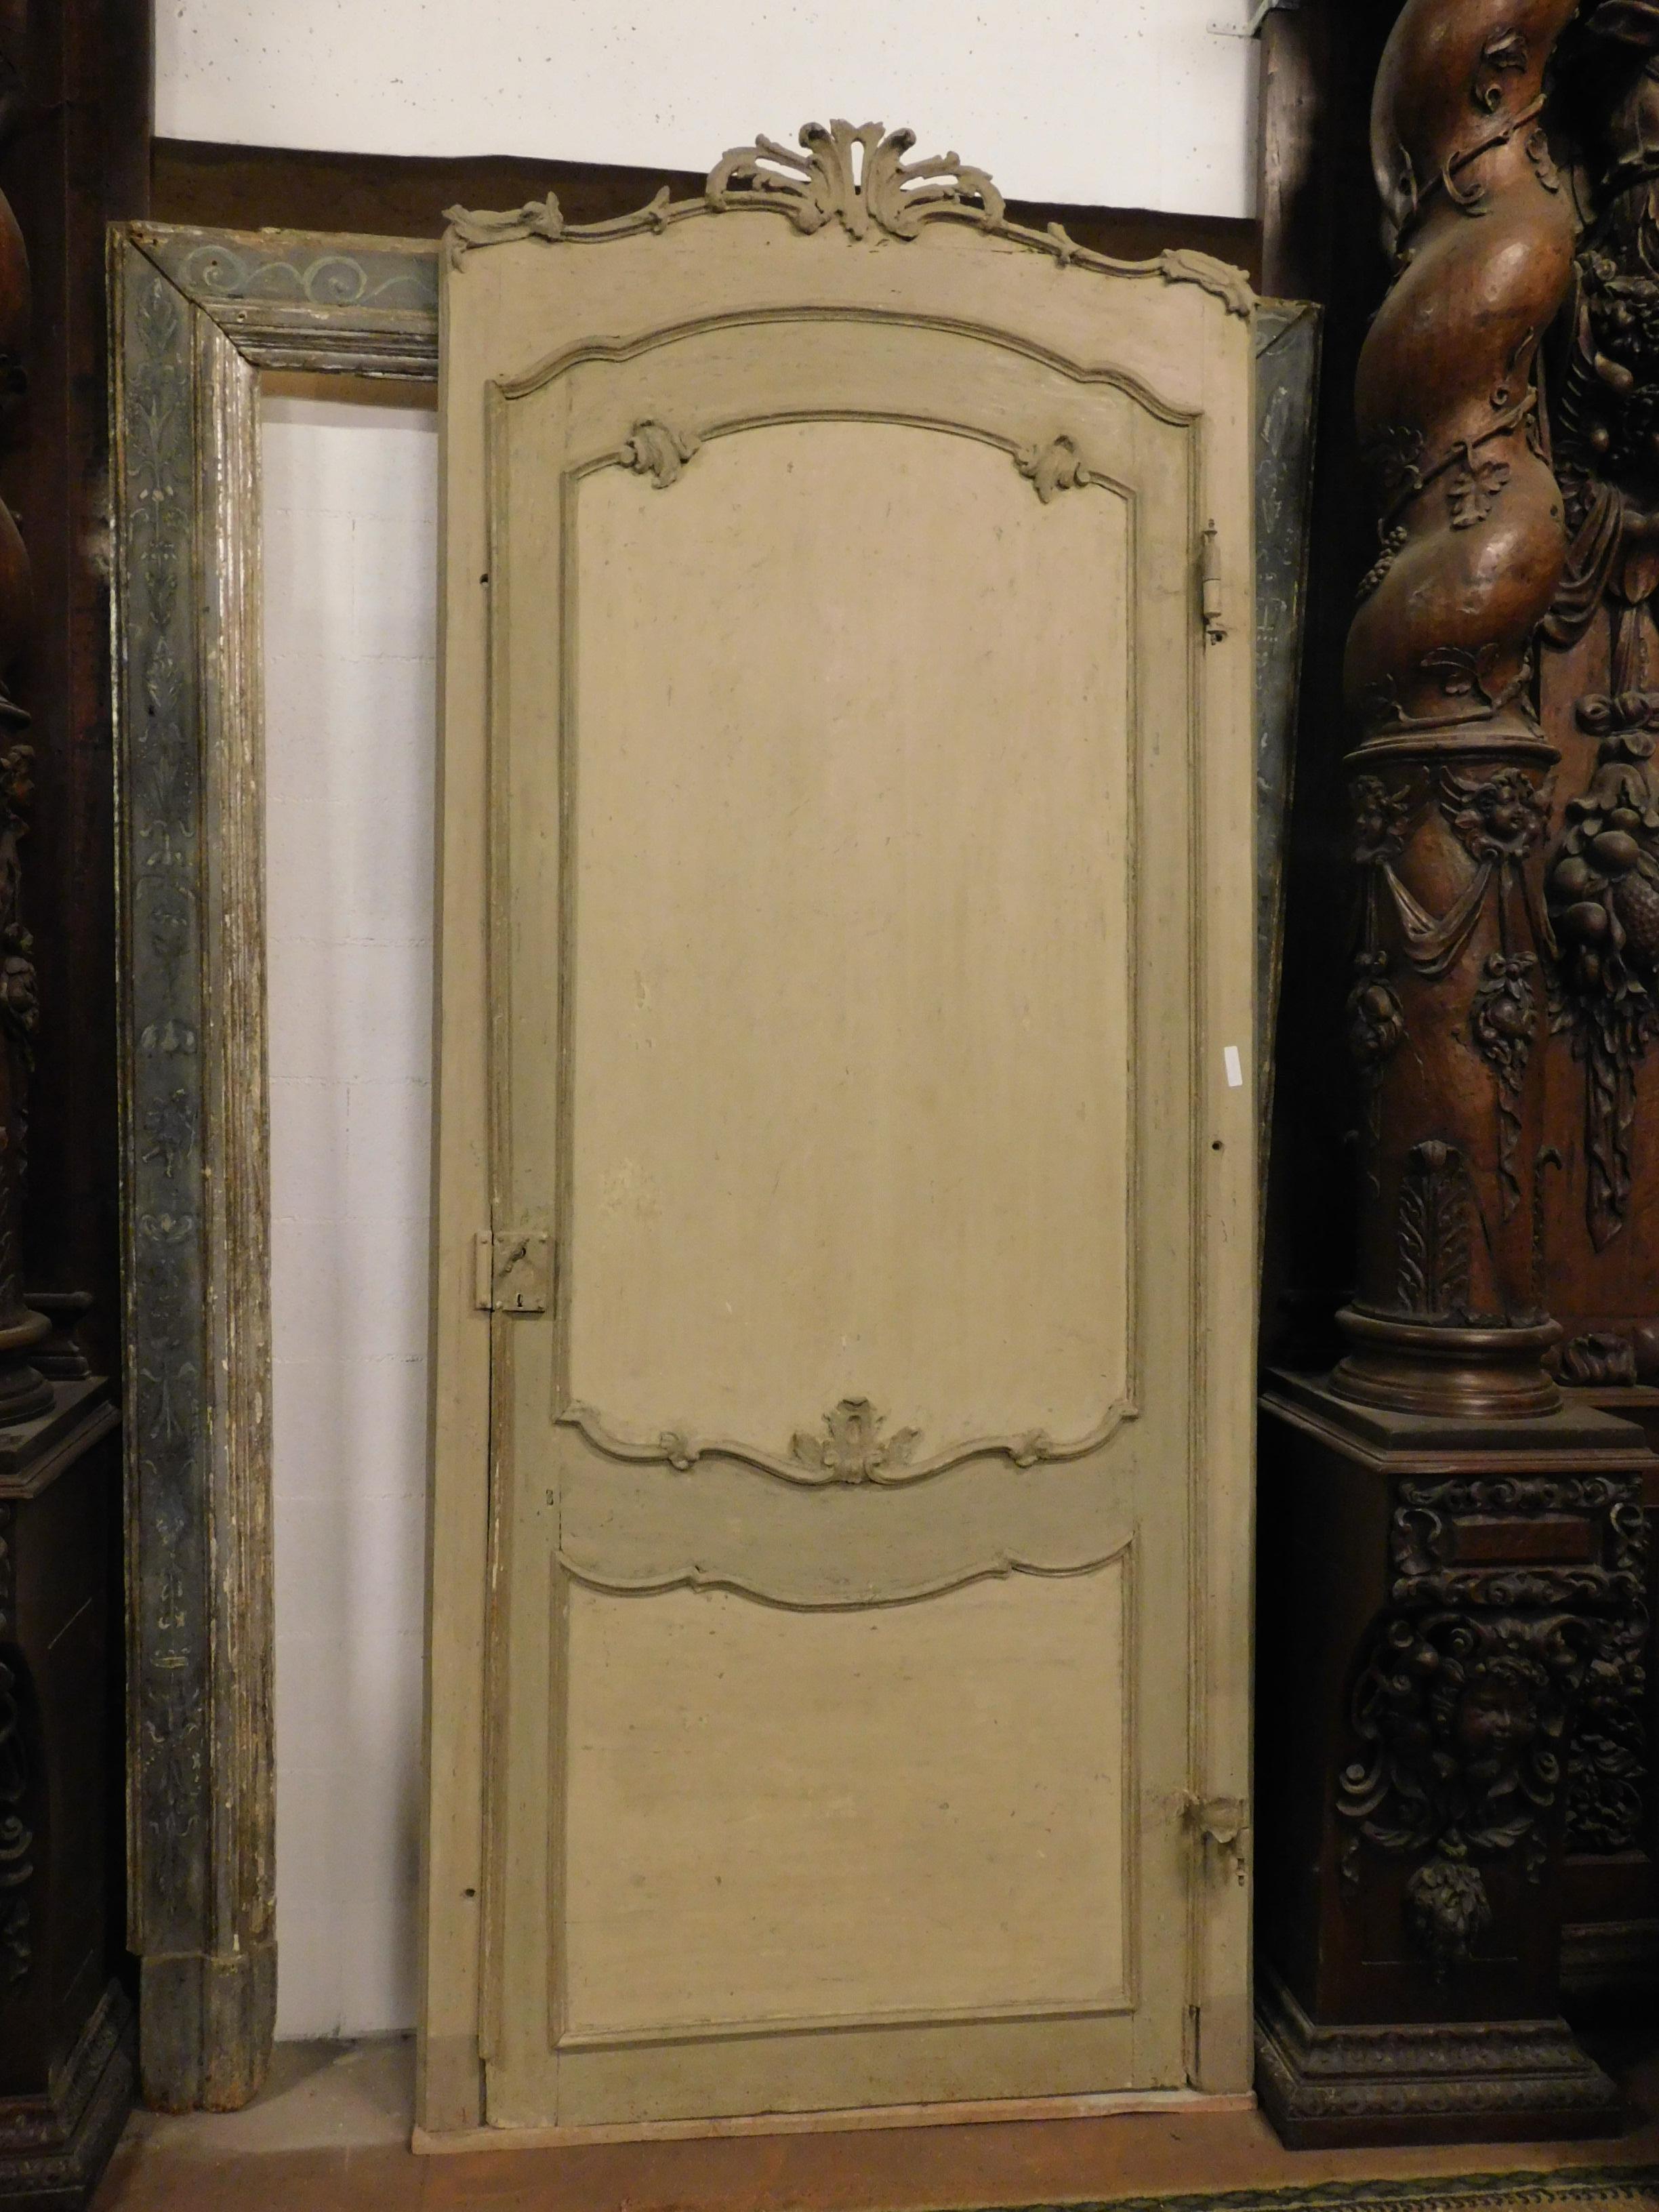 Ancient arched door in the upper part, lacquered by hand with warm gray - beige colors, with carved shells and original gooseneck iron, from a noble house of the 18th century in Italy.
The frame with frieze measures maximum height 271 cm x 117